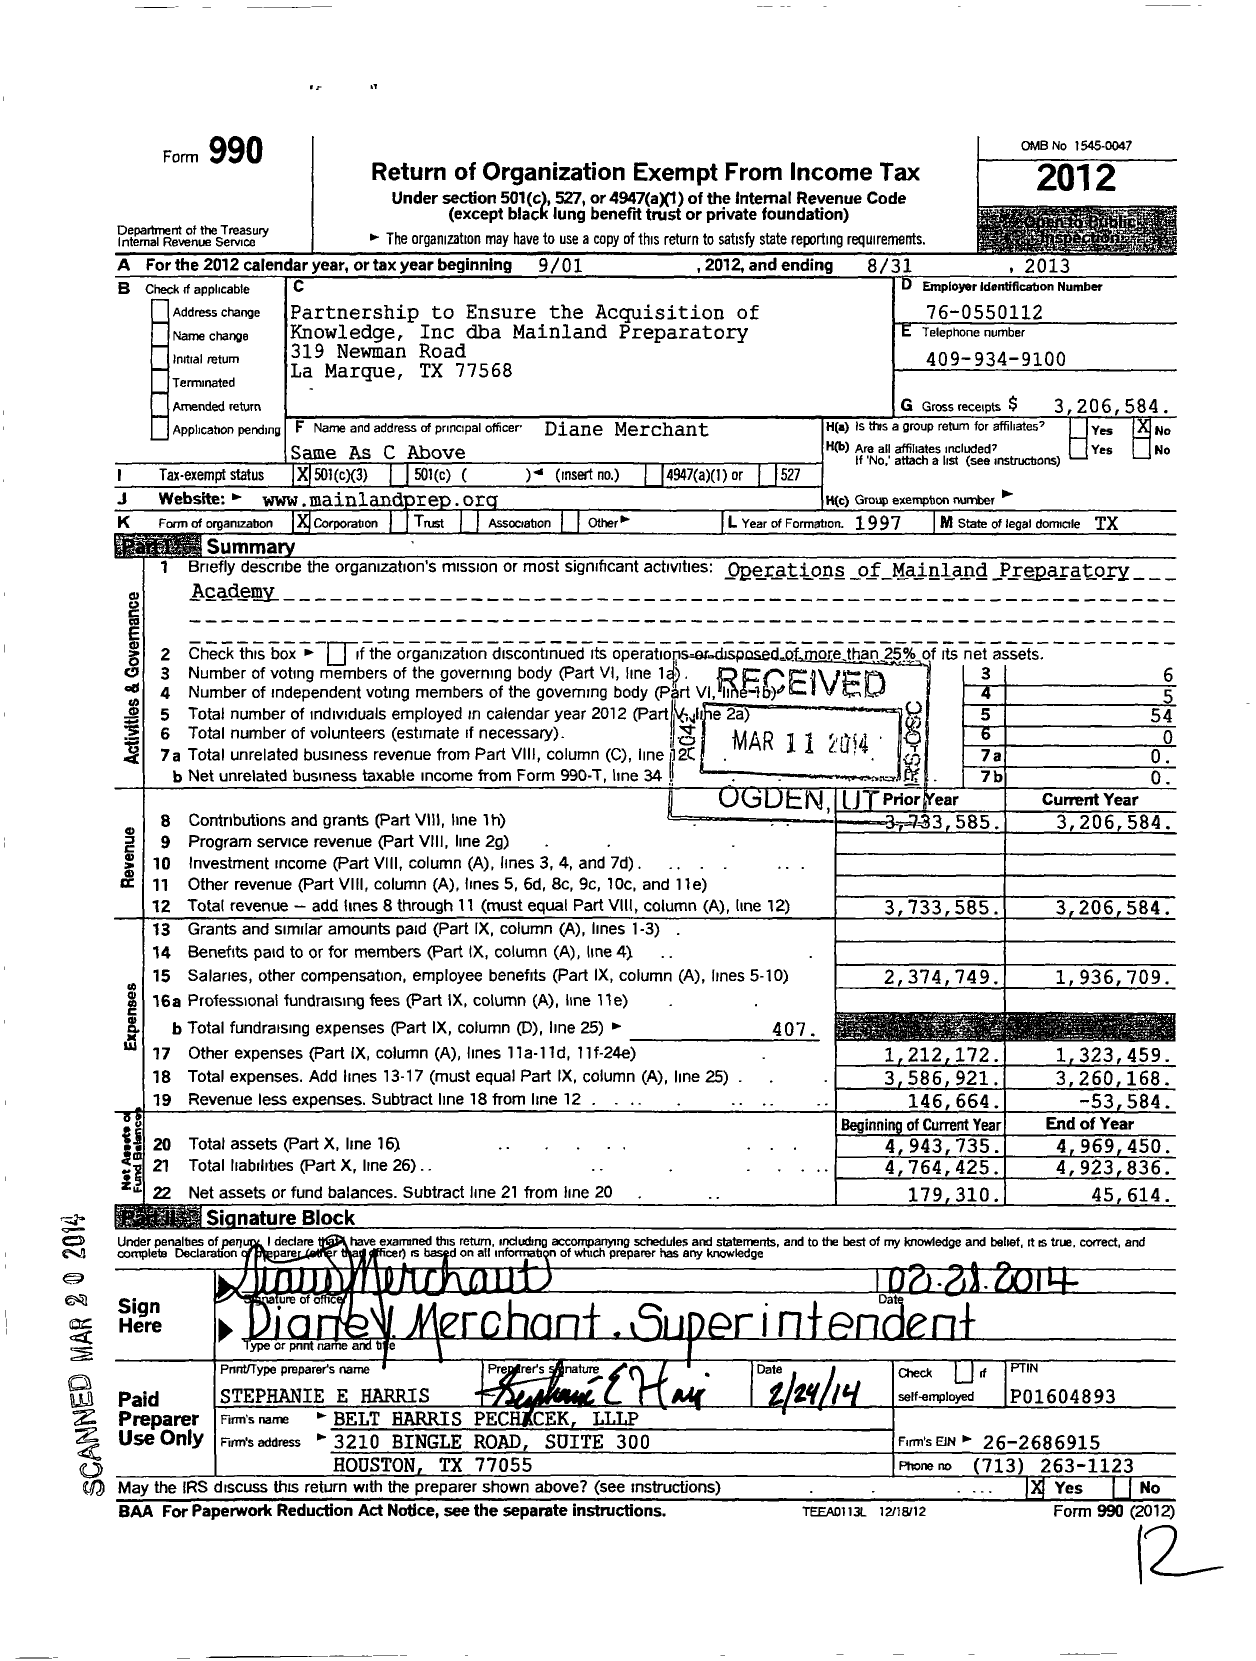 Image of first page of 2012 Form 990 for Partnership To Ensure the Acquisition of Knowledge